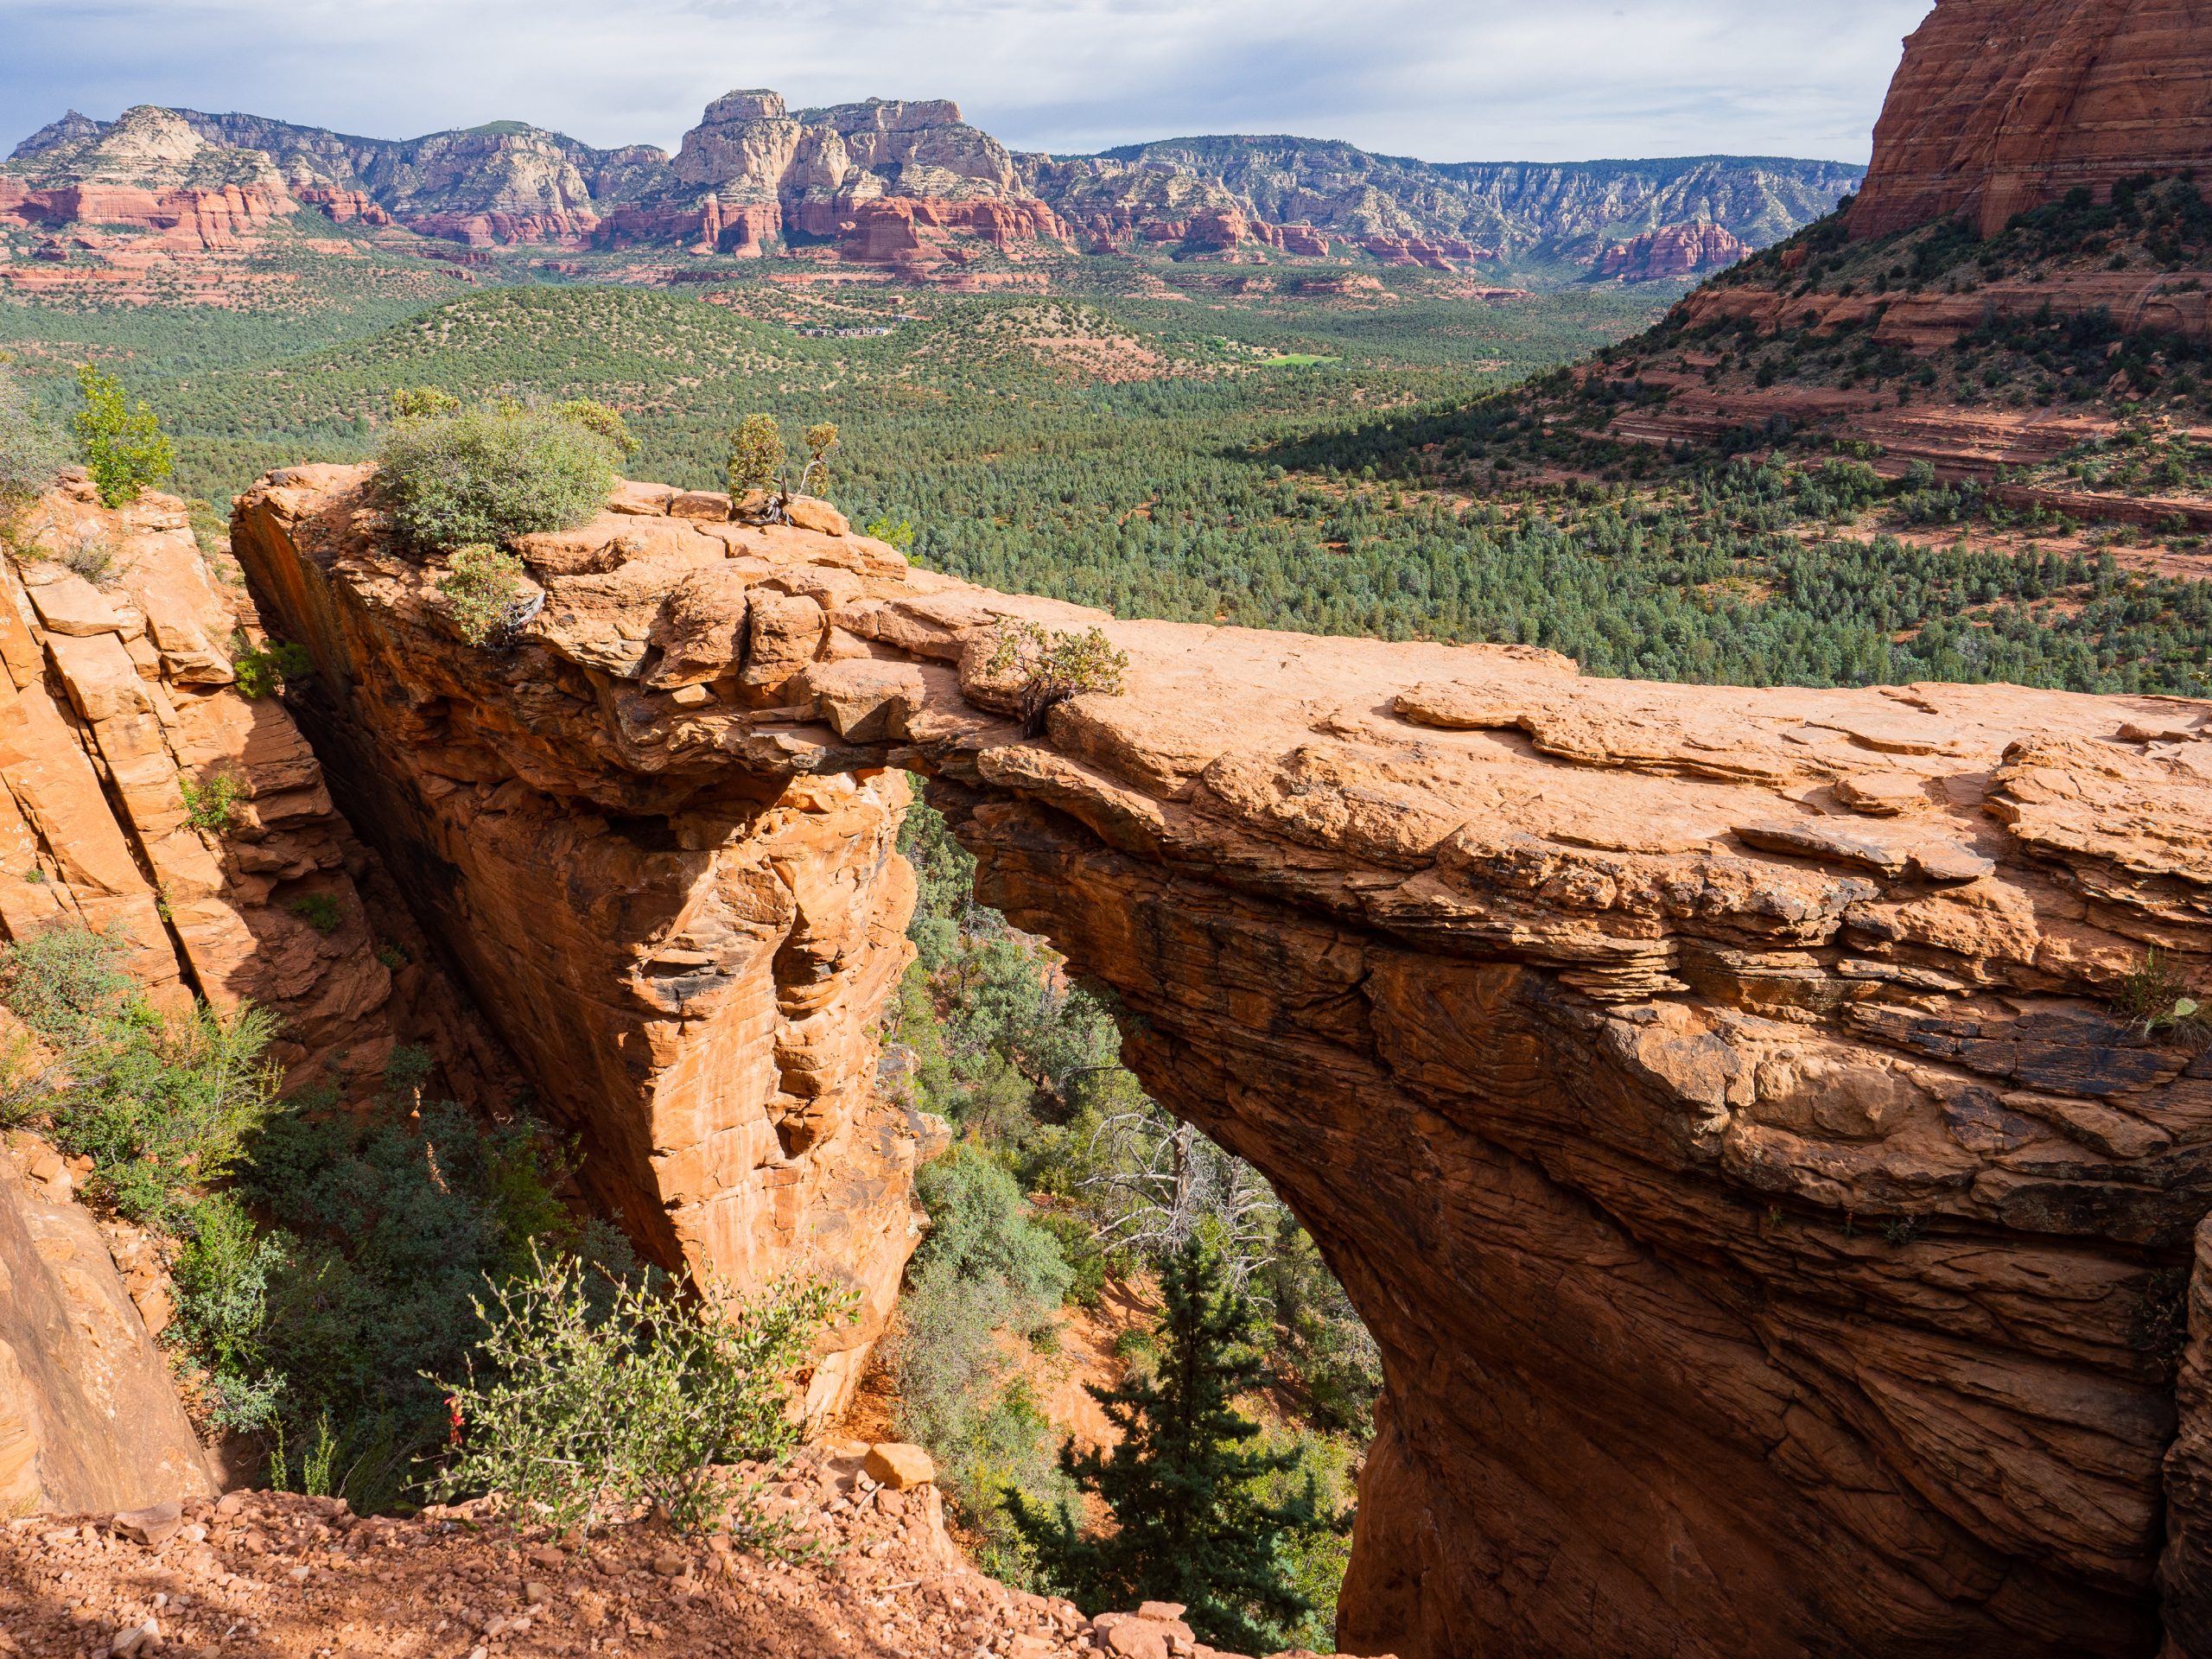 The narrow Devil's Bridge with red rocks in the background in Sedona